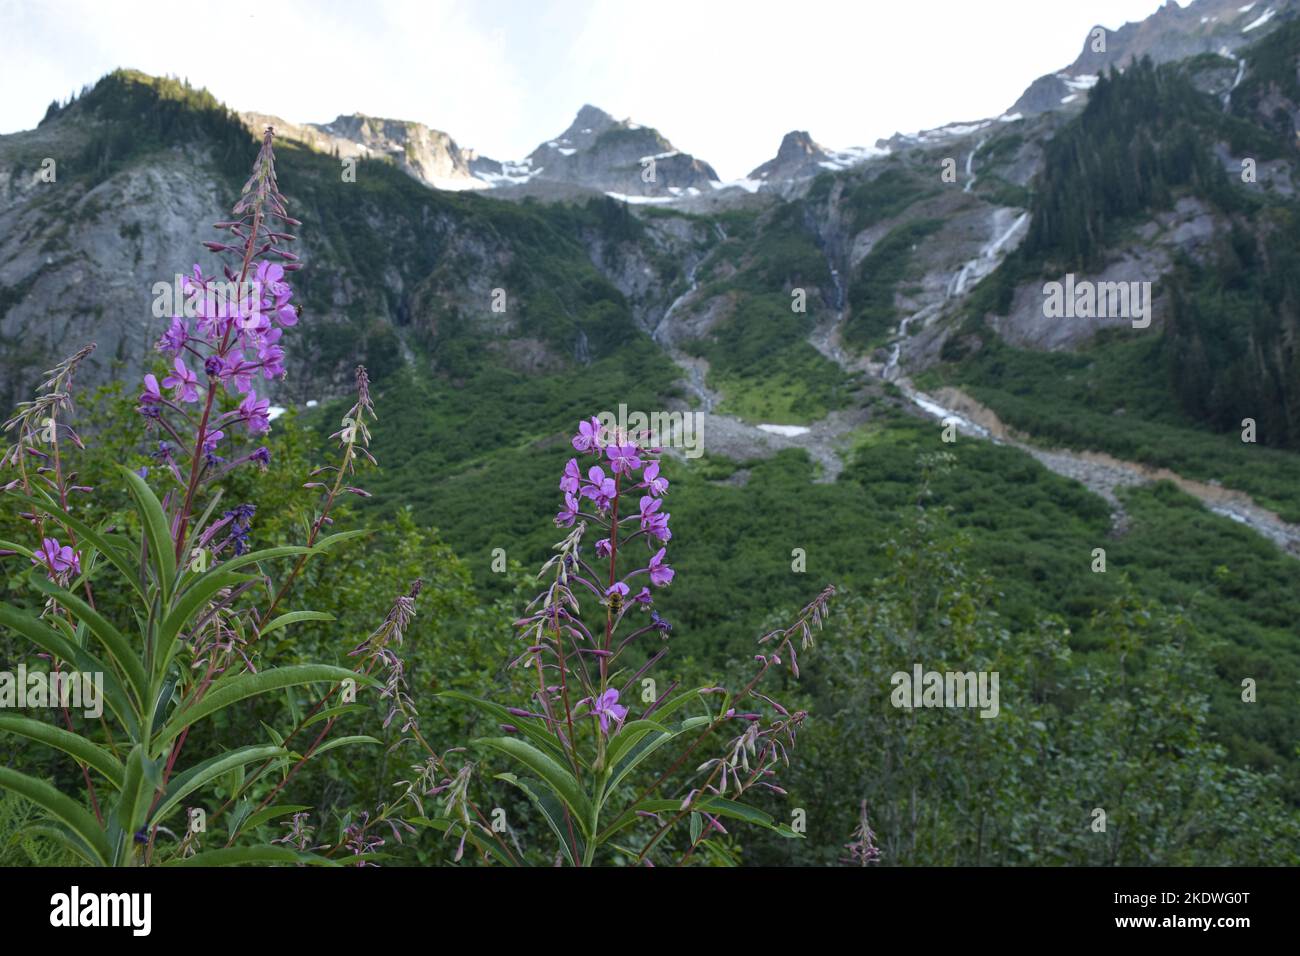 Purple fireweed along the Copper Ridge Trail in North Cascades National Park. Looking at Mineral Mountain or Ruth Mountain. Stock Photo